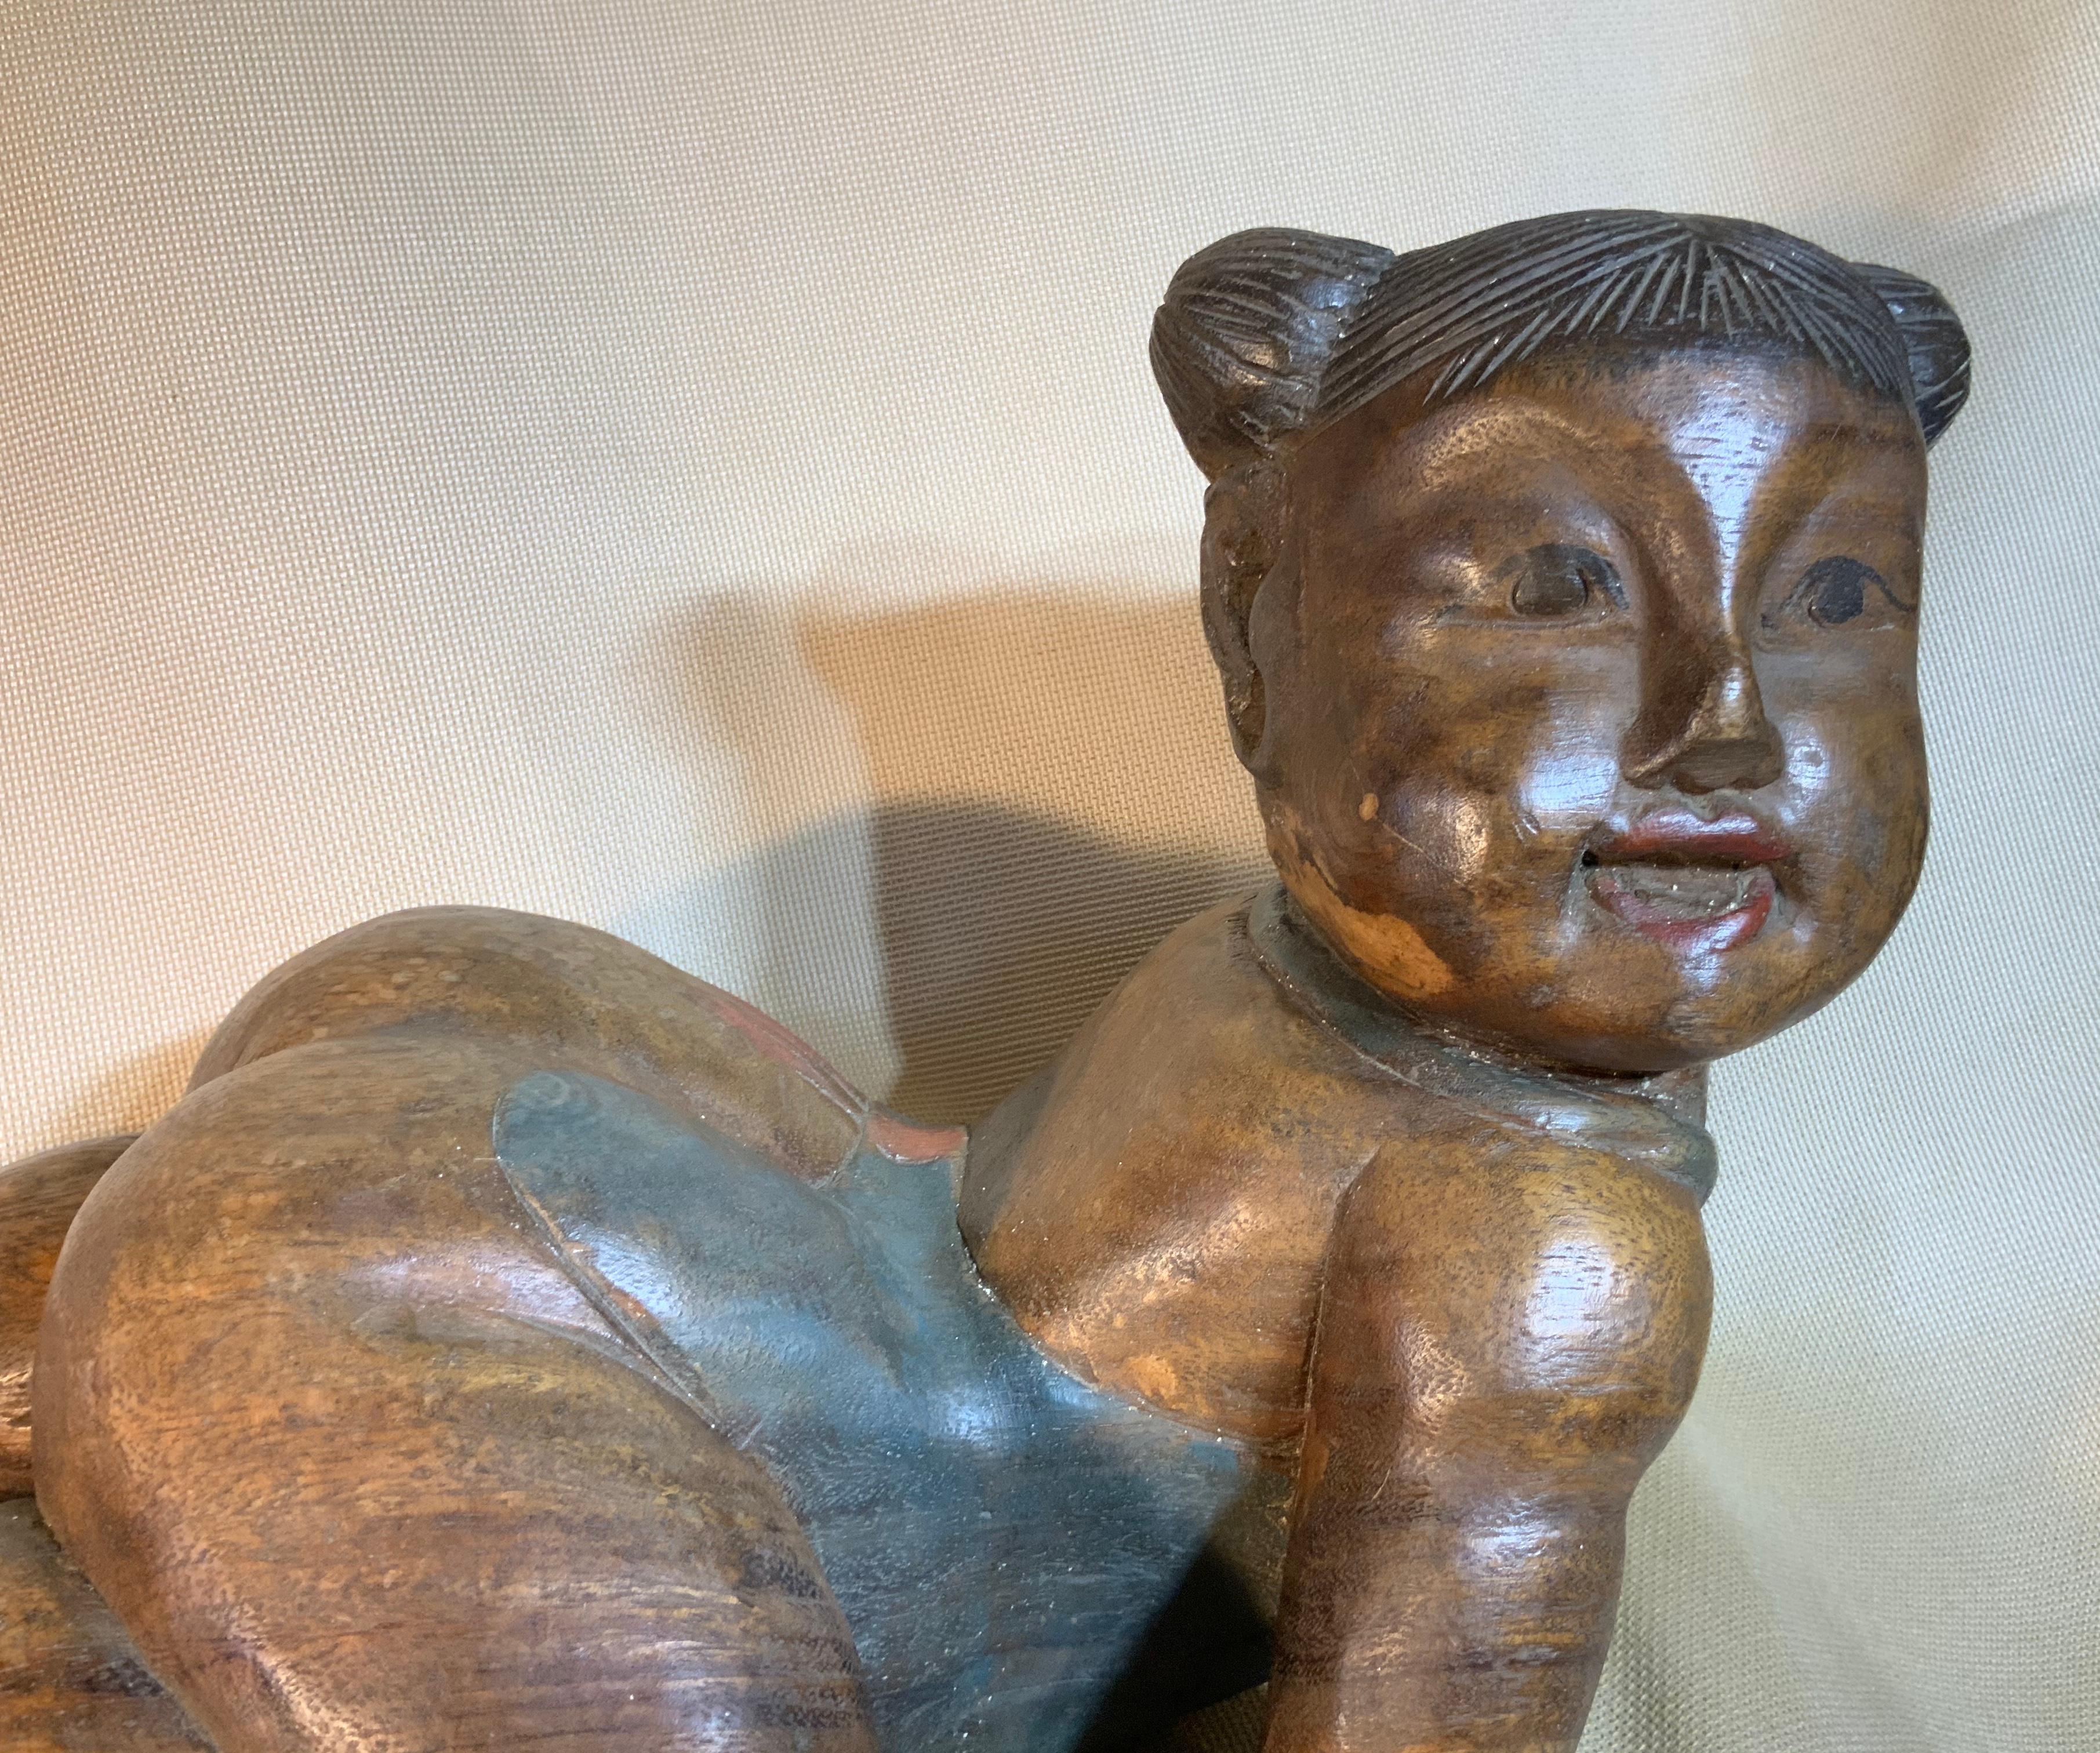 Elegant laying down wood statue of baby girl gentle facial expression
with two piggy tail, originally painted in some parts.
Beautiful object of art for display.